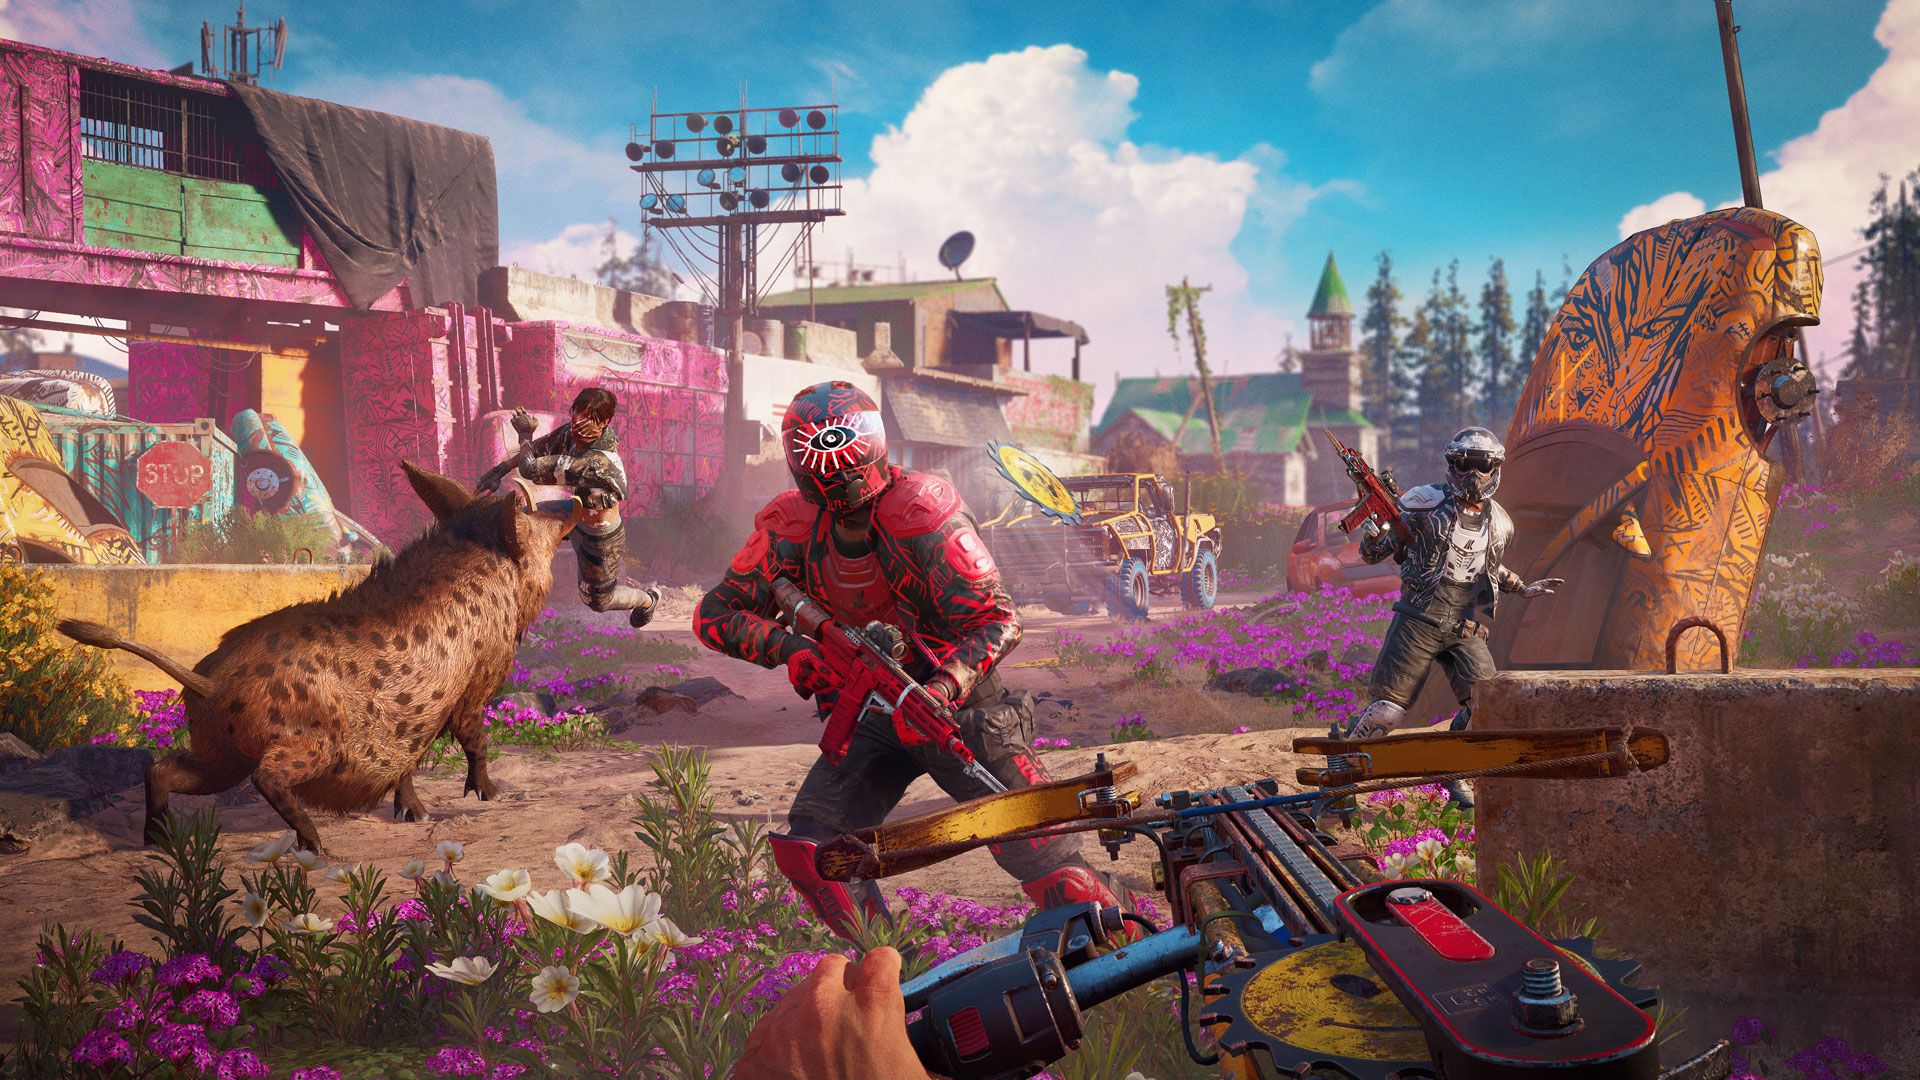 How to find your character from Far Cry 5 in Far Cry New Dawn